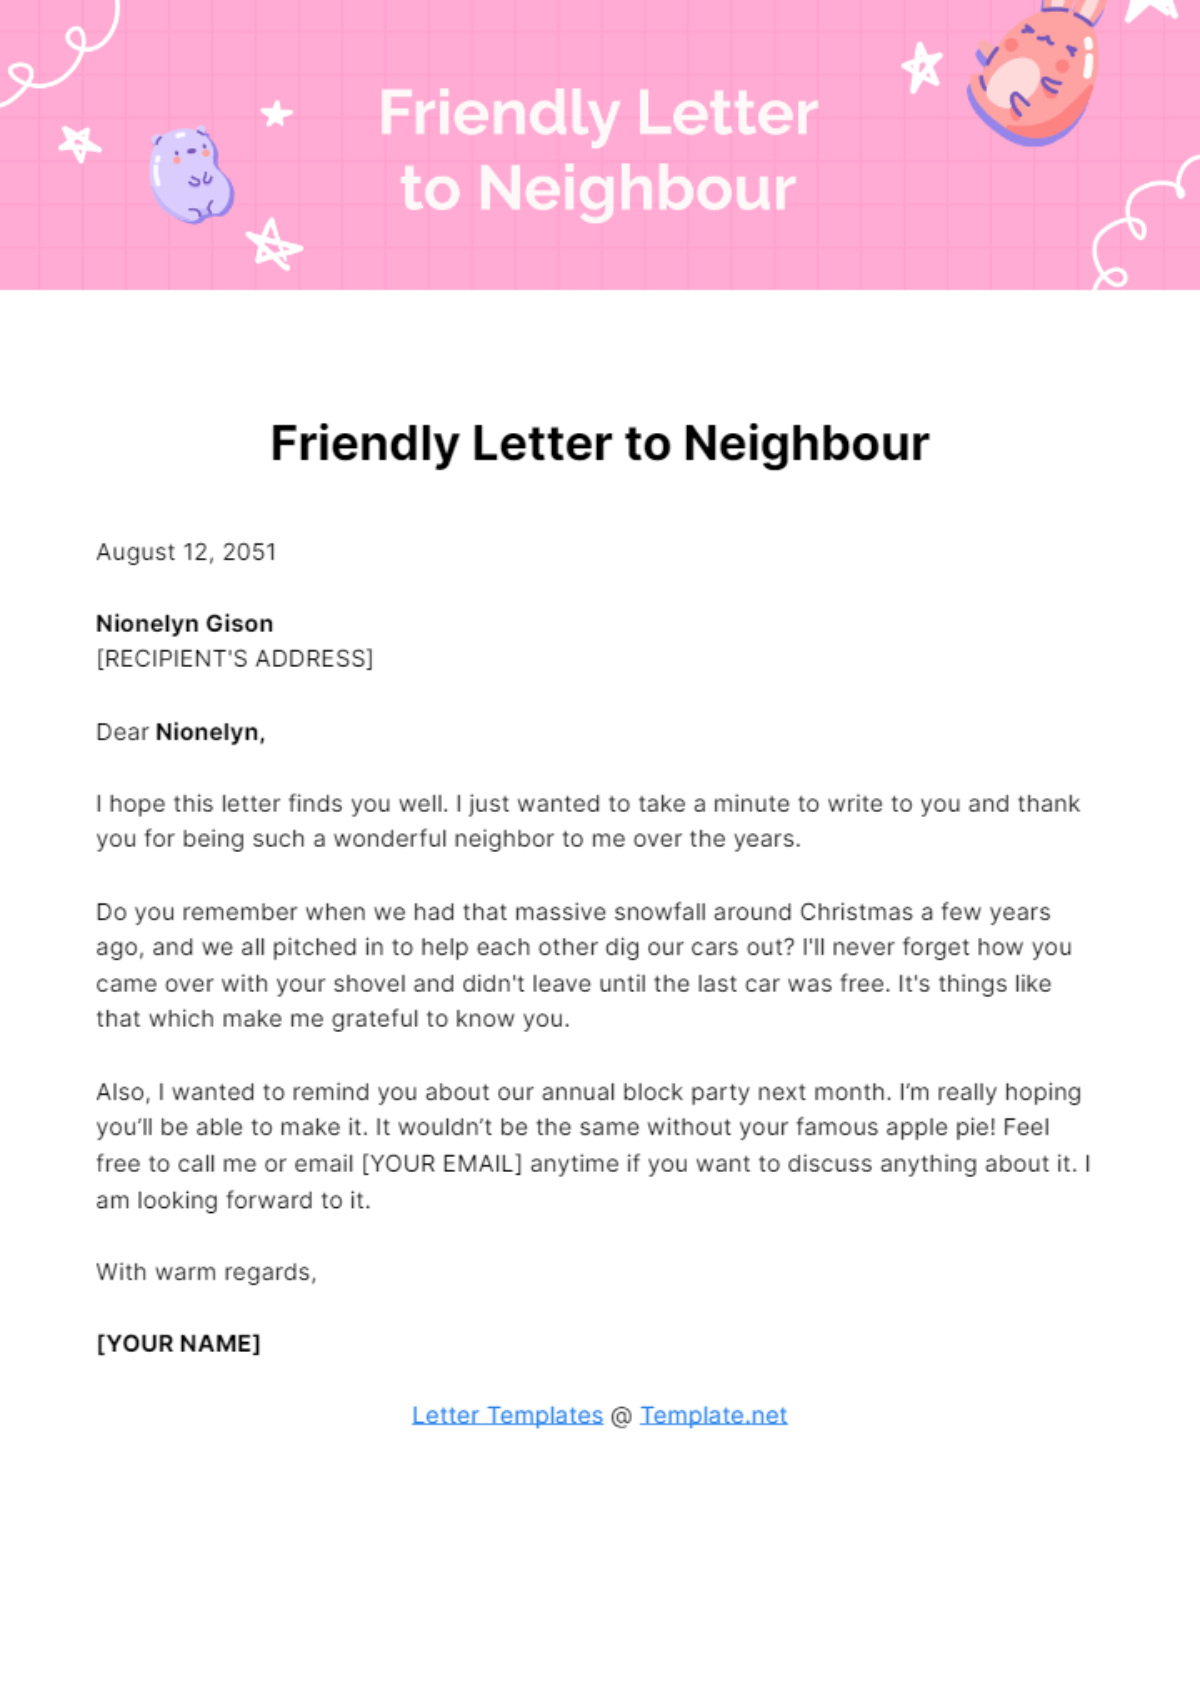 Free Friendly Letter to Neighbor Template